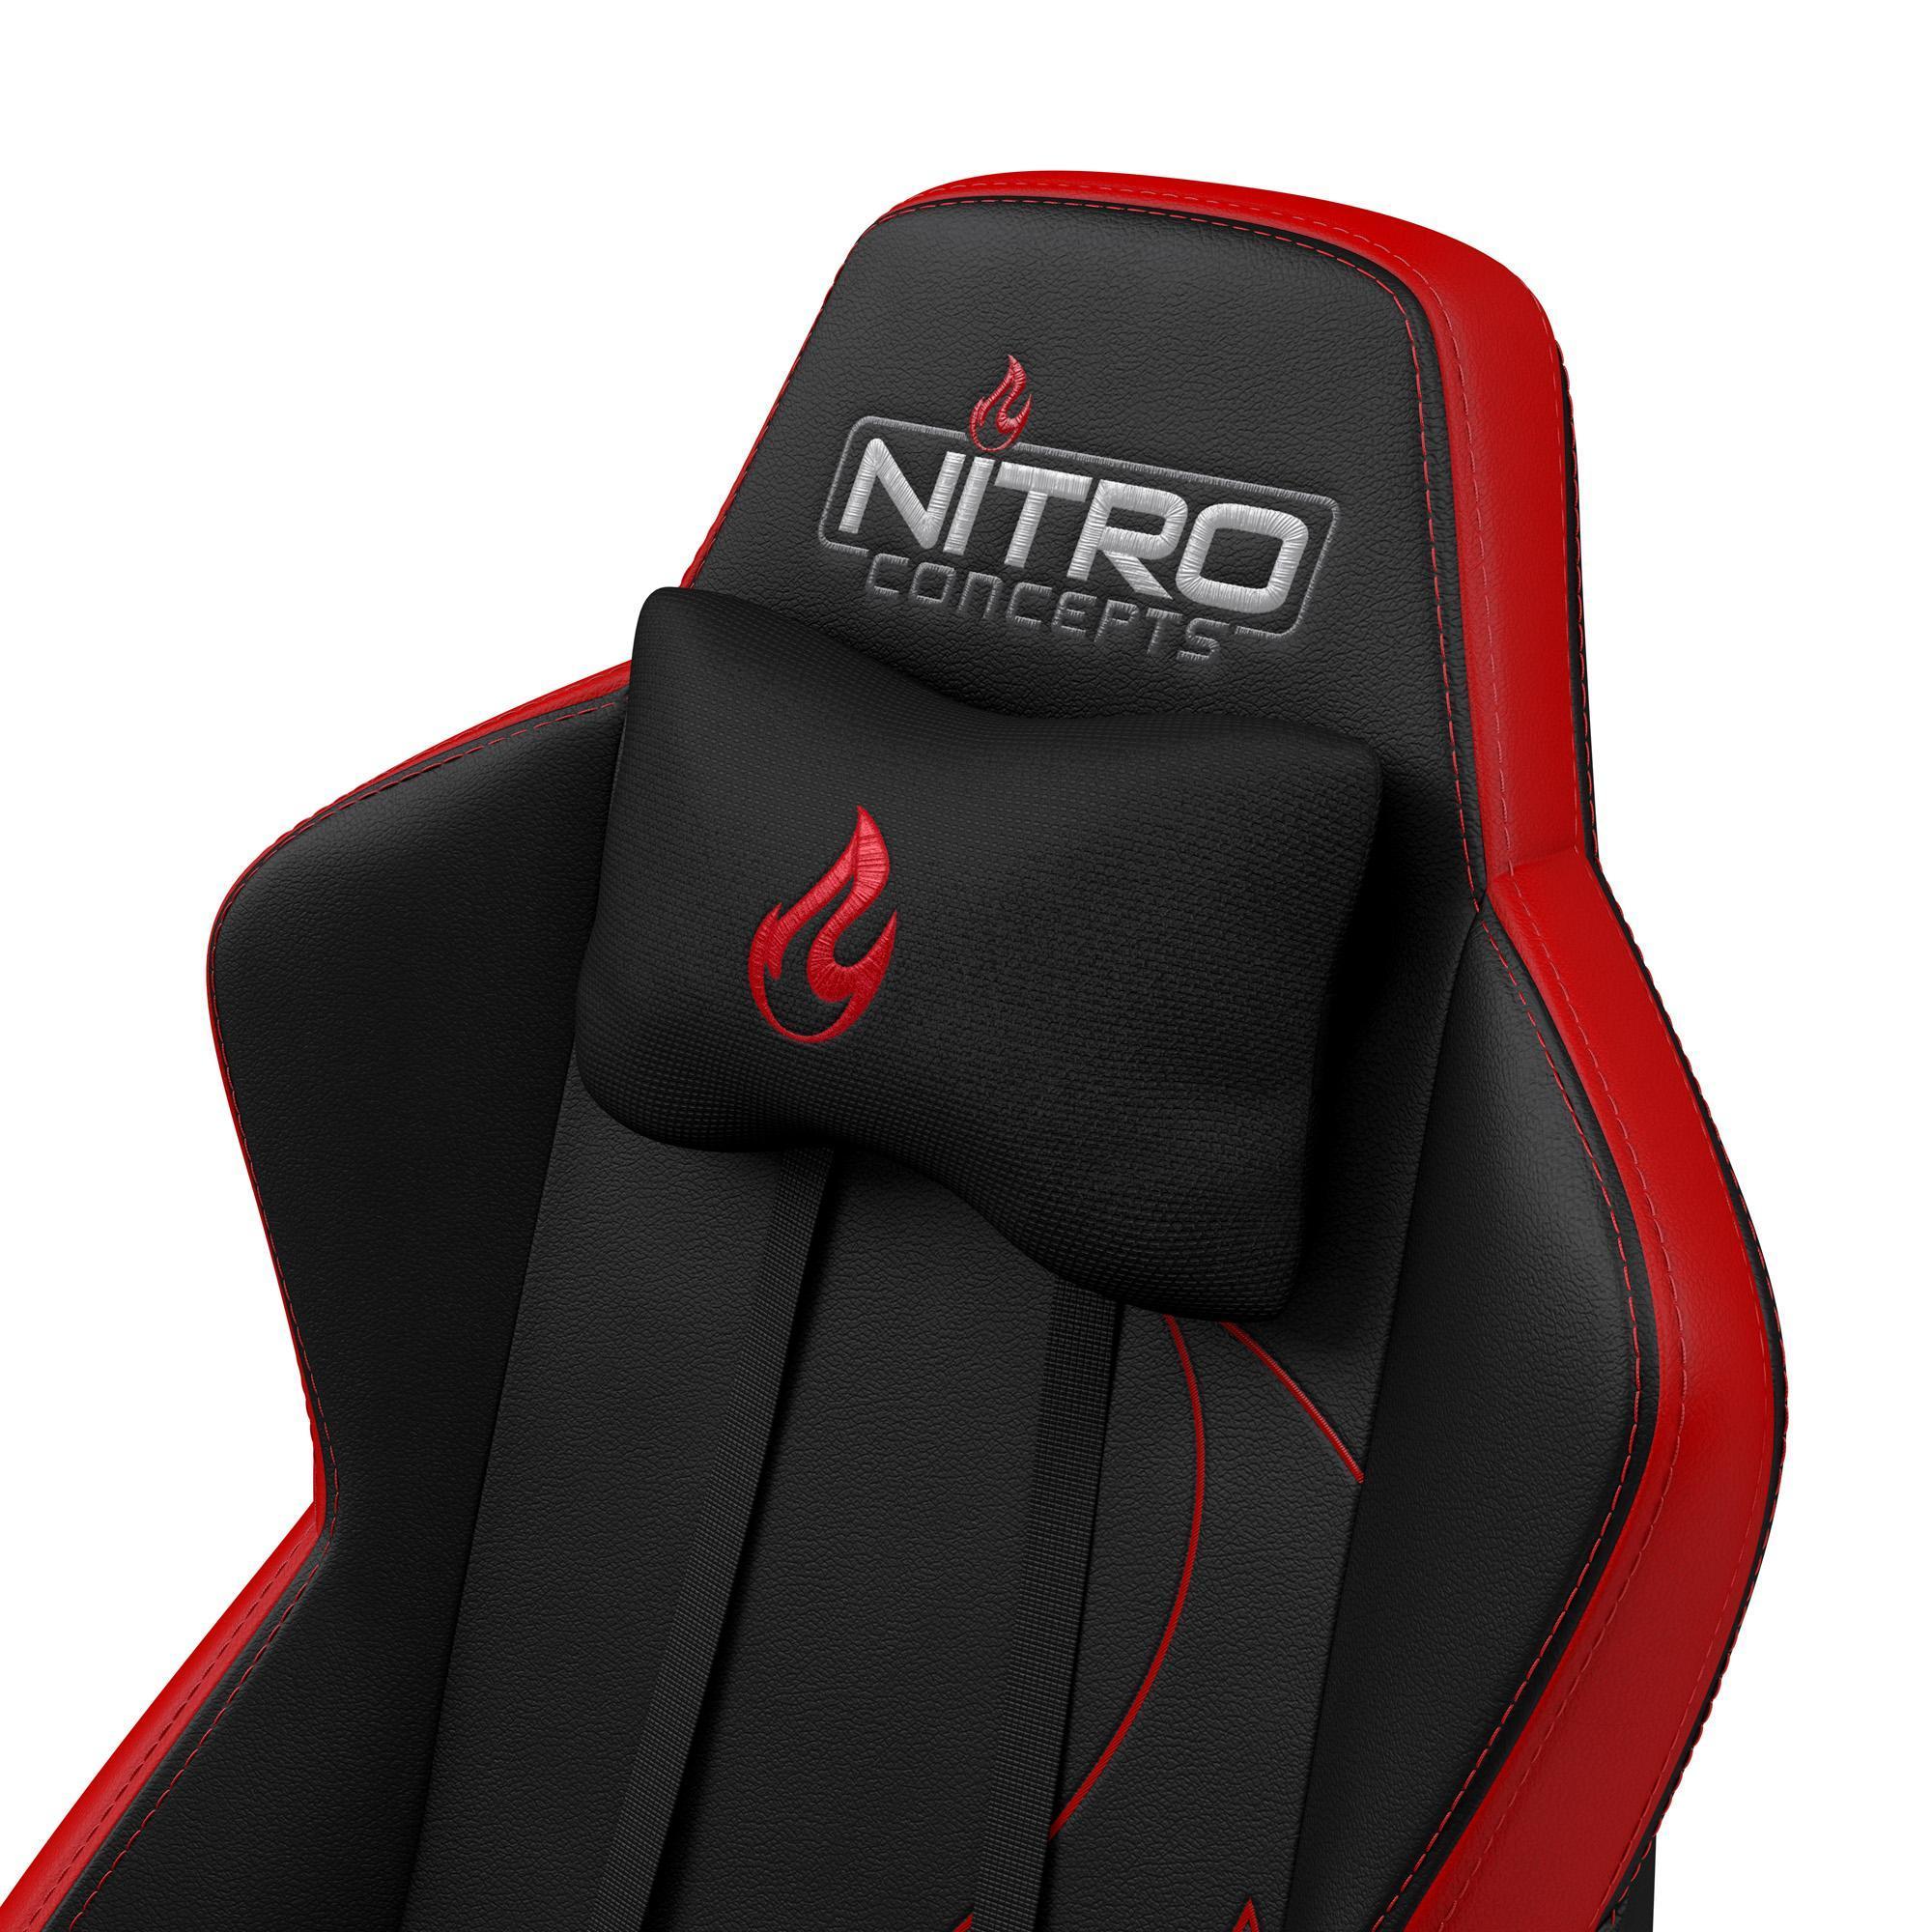 Nitro Concepts S300 EX Gaming Chair - Inferno Red - NC-S300EX-BR | Novatech